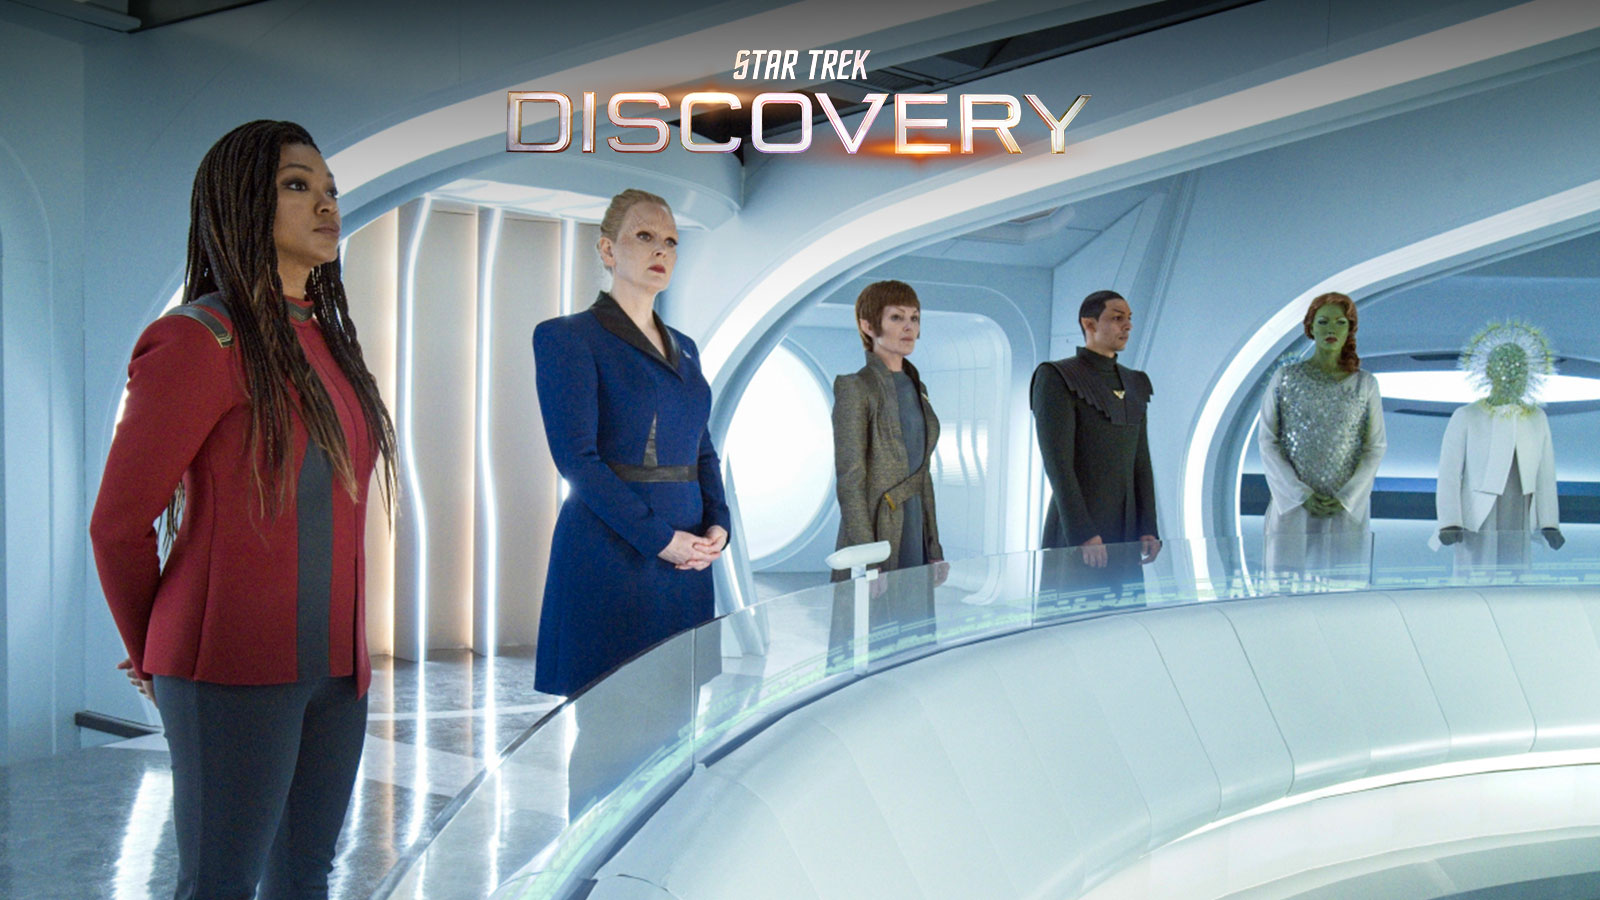 Star Trek: Discovery Episode 407 “…But To Connect” Preview + New Photos